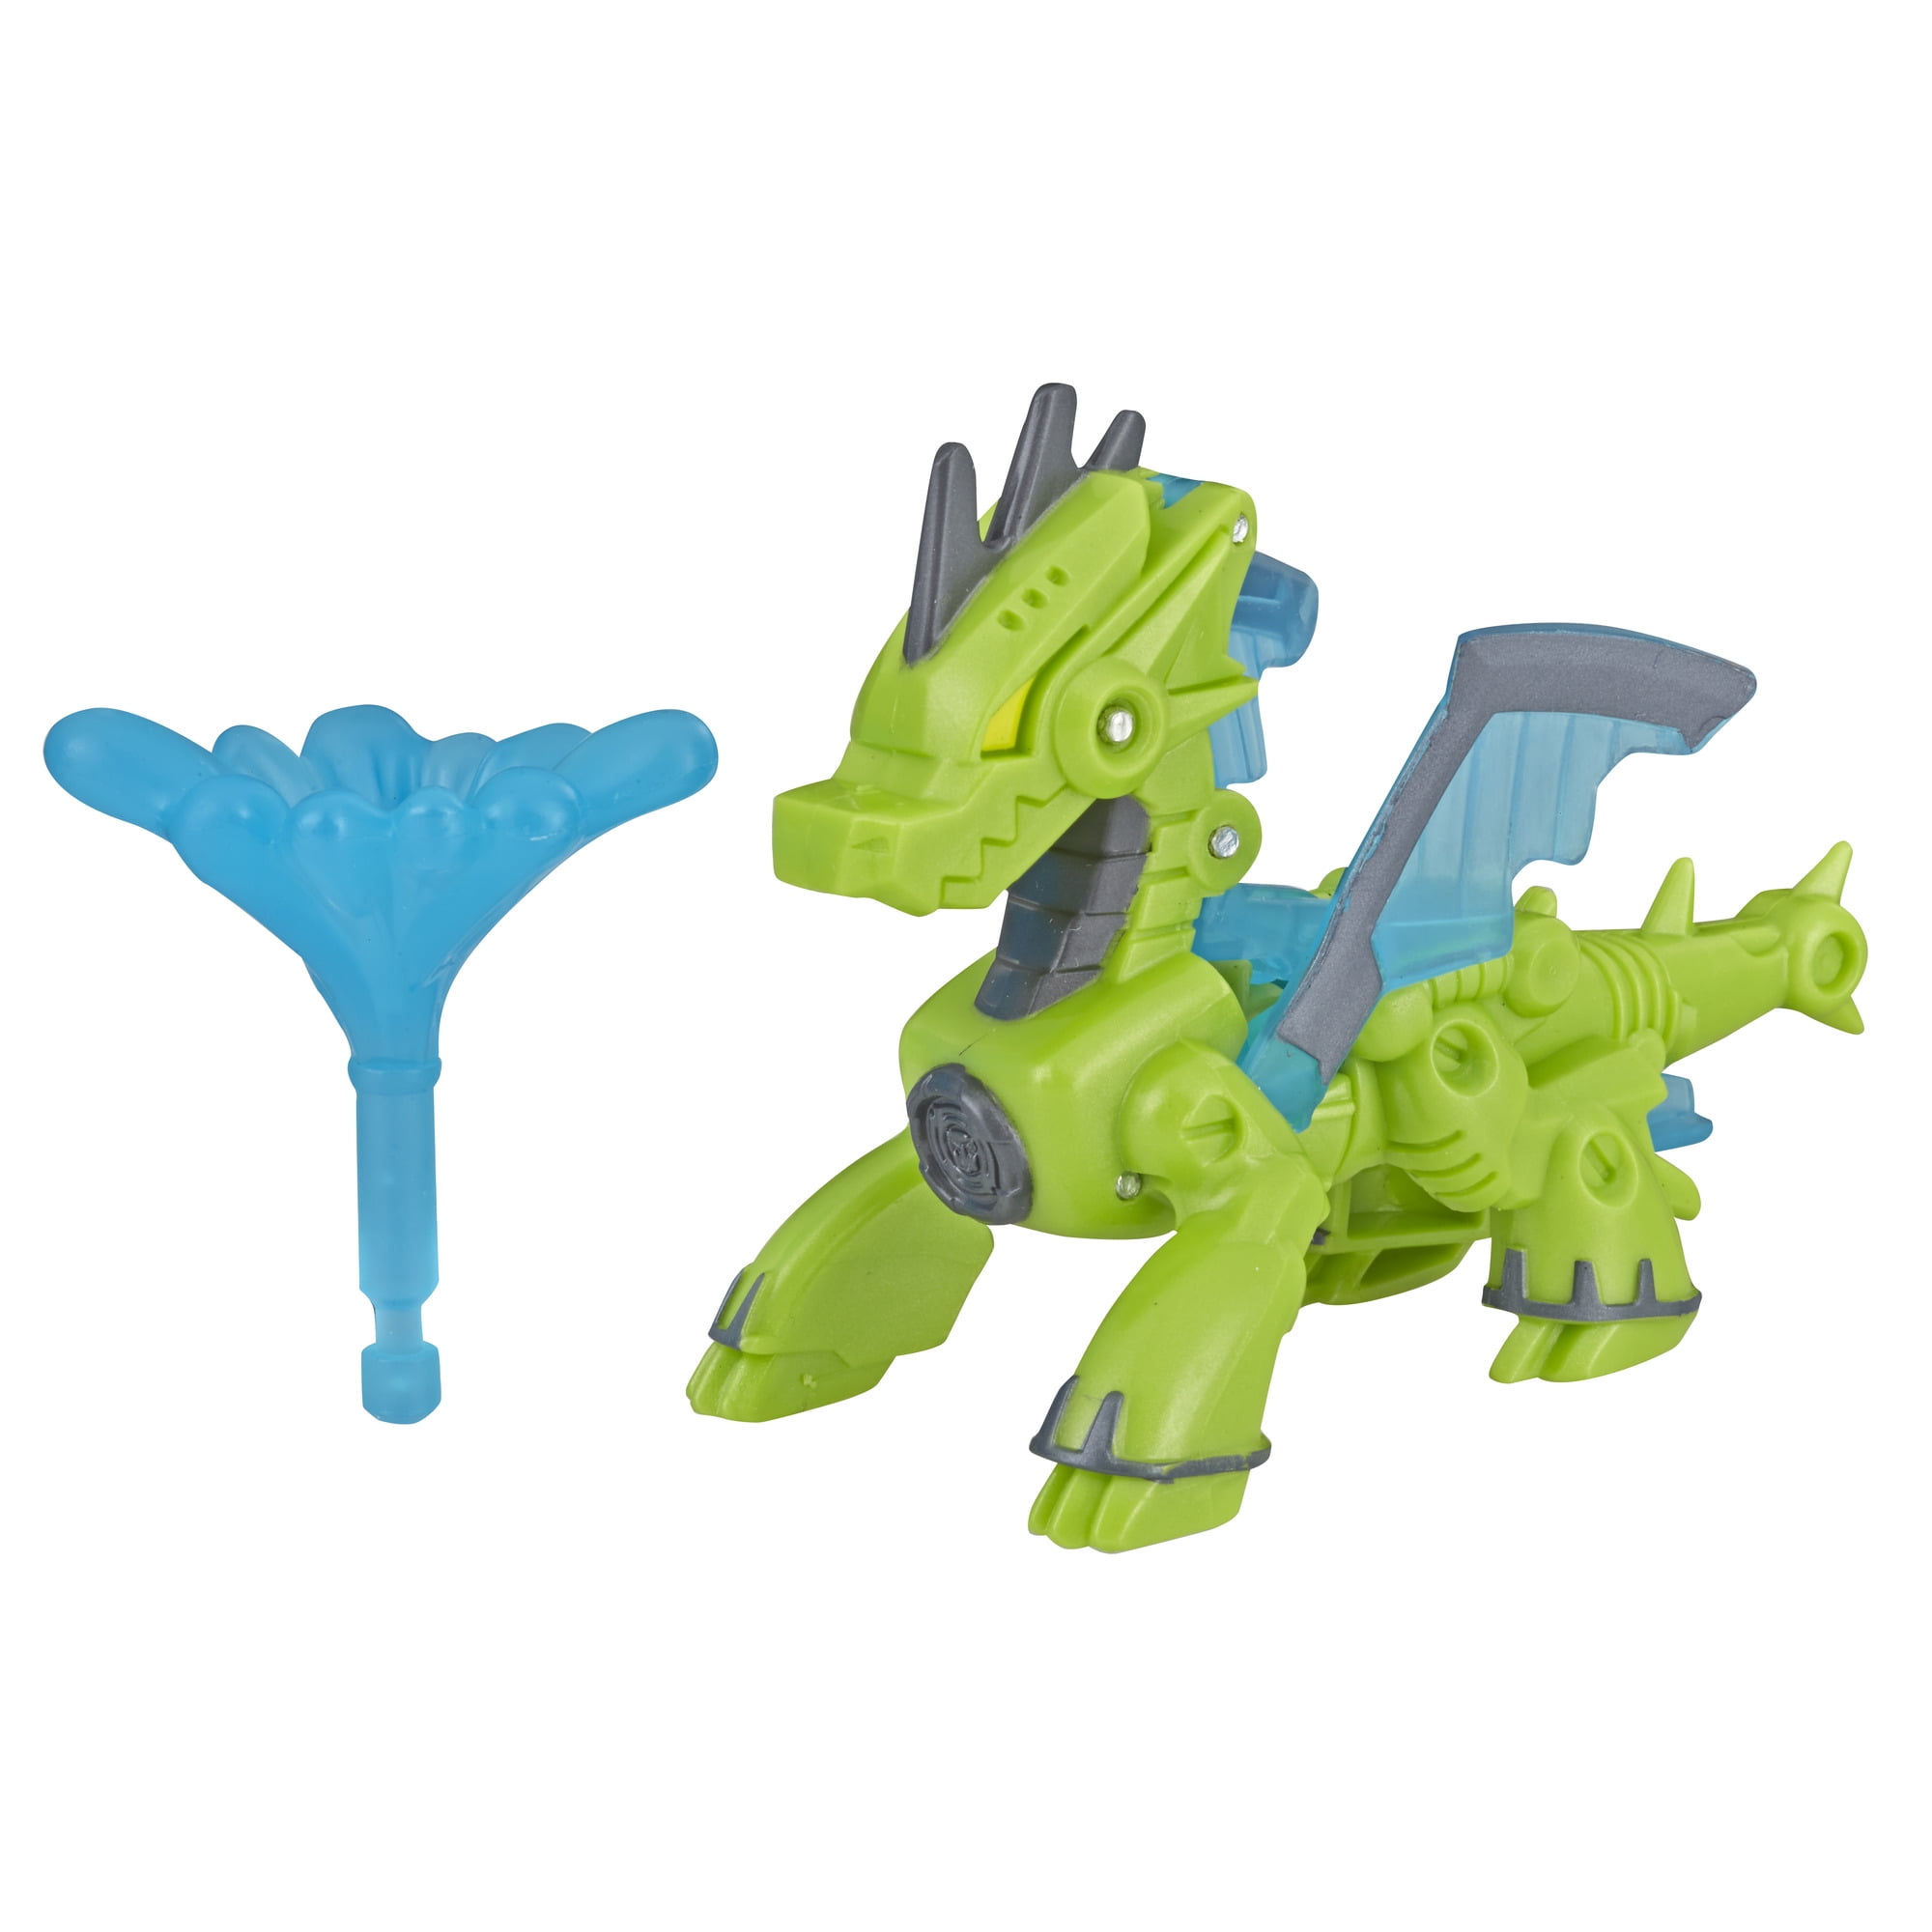 Transformers RESCUE BOTS DRAKE THE DRAGON-BOT Playskool Heroes Action figure Toy